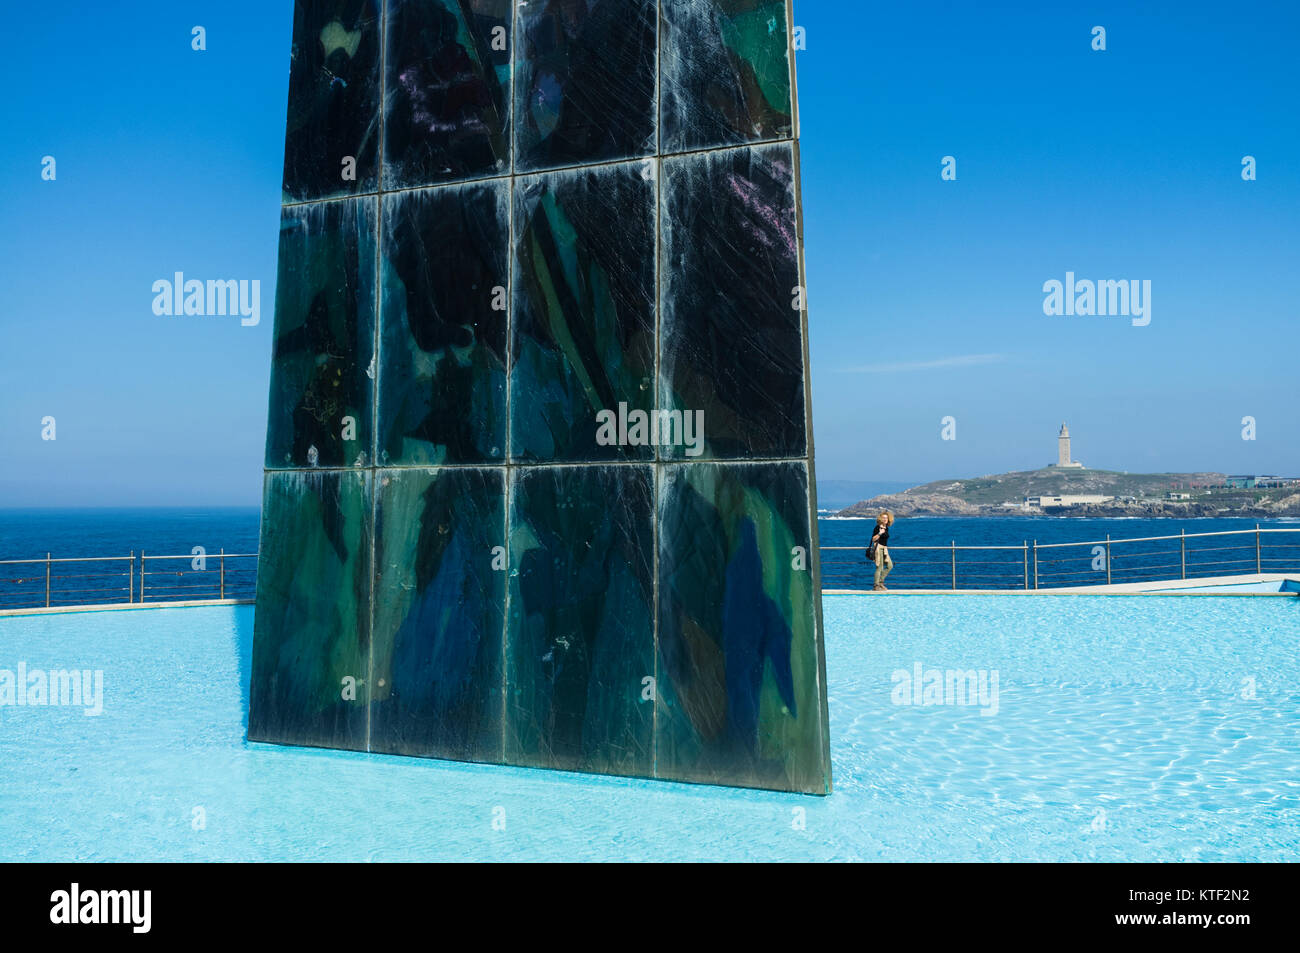 Millenium obelisk erected in 2000 to commemorate the beginning of the XXI century. at the promenade of Coruña city. Galicia, Spain, Europe Stock Photo